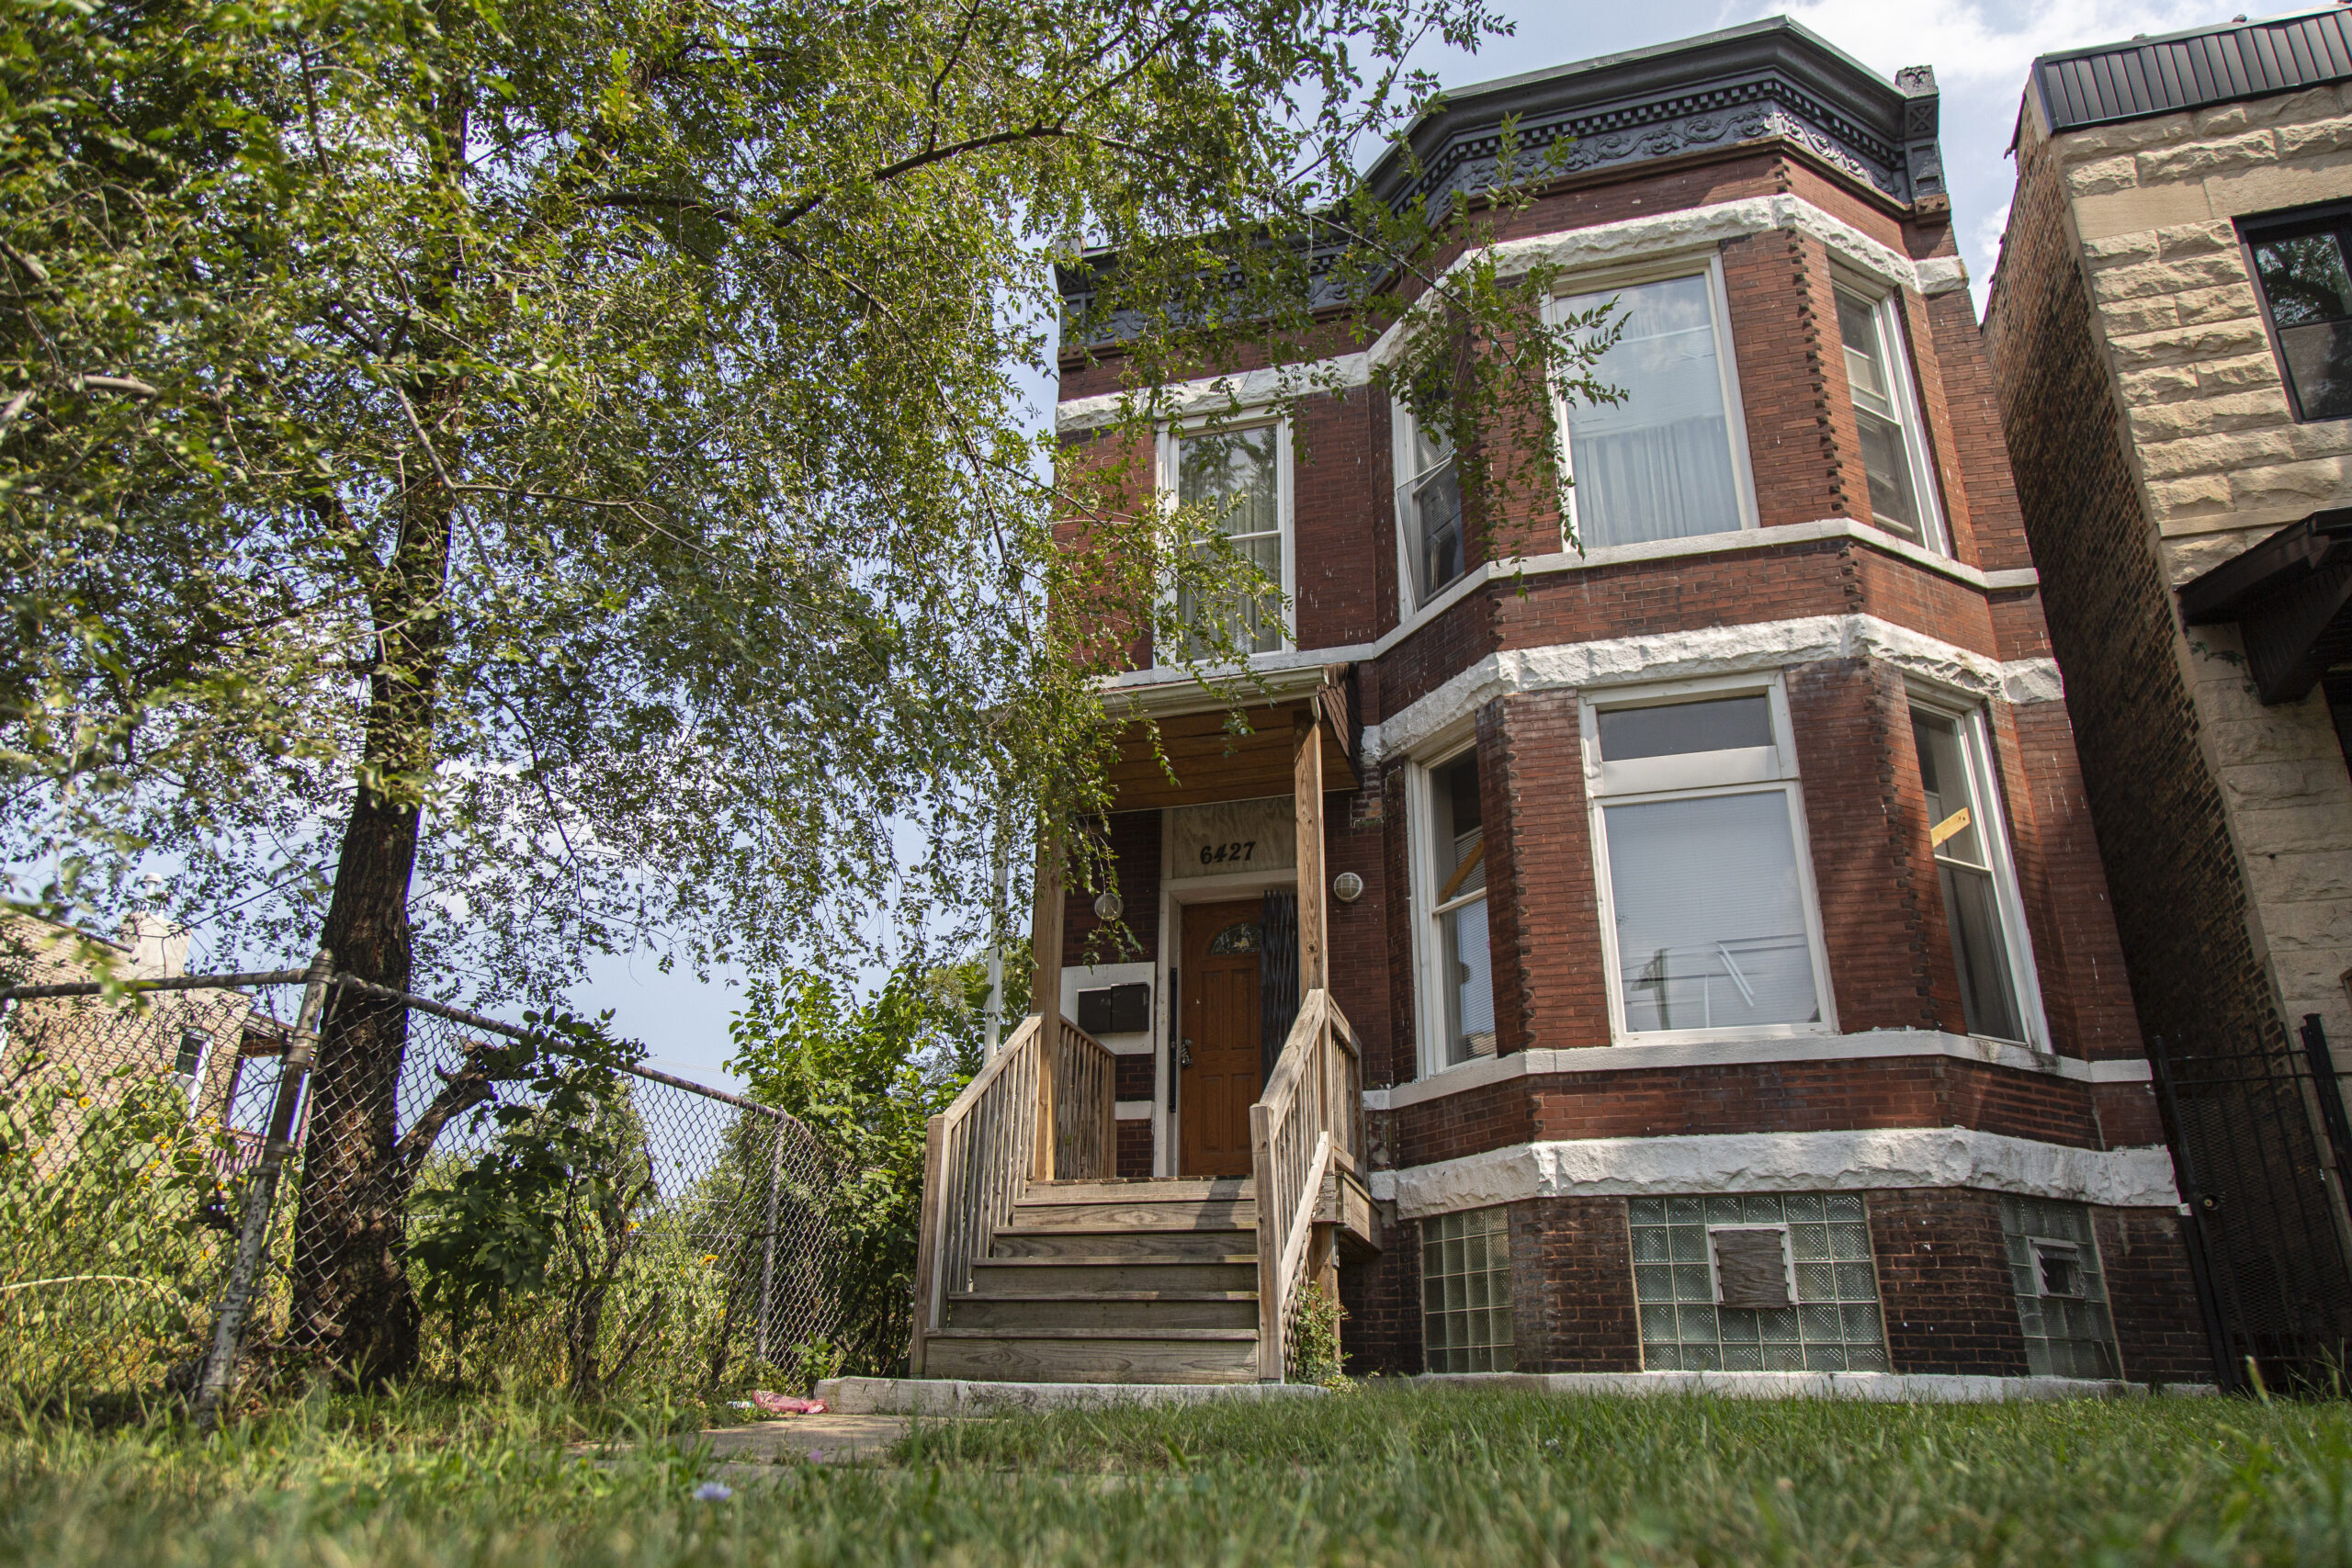 FILE - In this Aug. 26, 2020 file photo, the former home of Emmett and Mamie Till at 6427 S St. Lawrence Avenue is pictured in the West Woodlawn neighborhood of Chicago. Emmett Till's Chicago home is one of more than two dozen historically significant sites that will share in $3 million grant money from a preservation organization. (Anthony Vazquez/Chicago Sun-Times via AP, File)